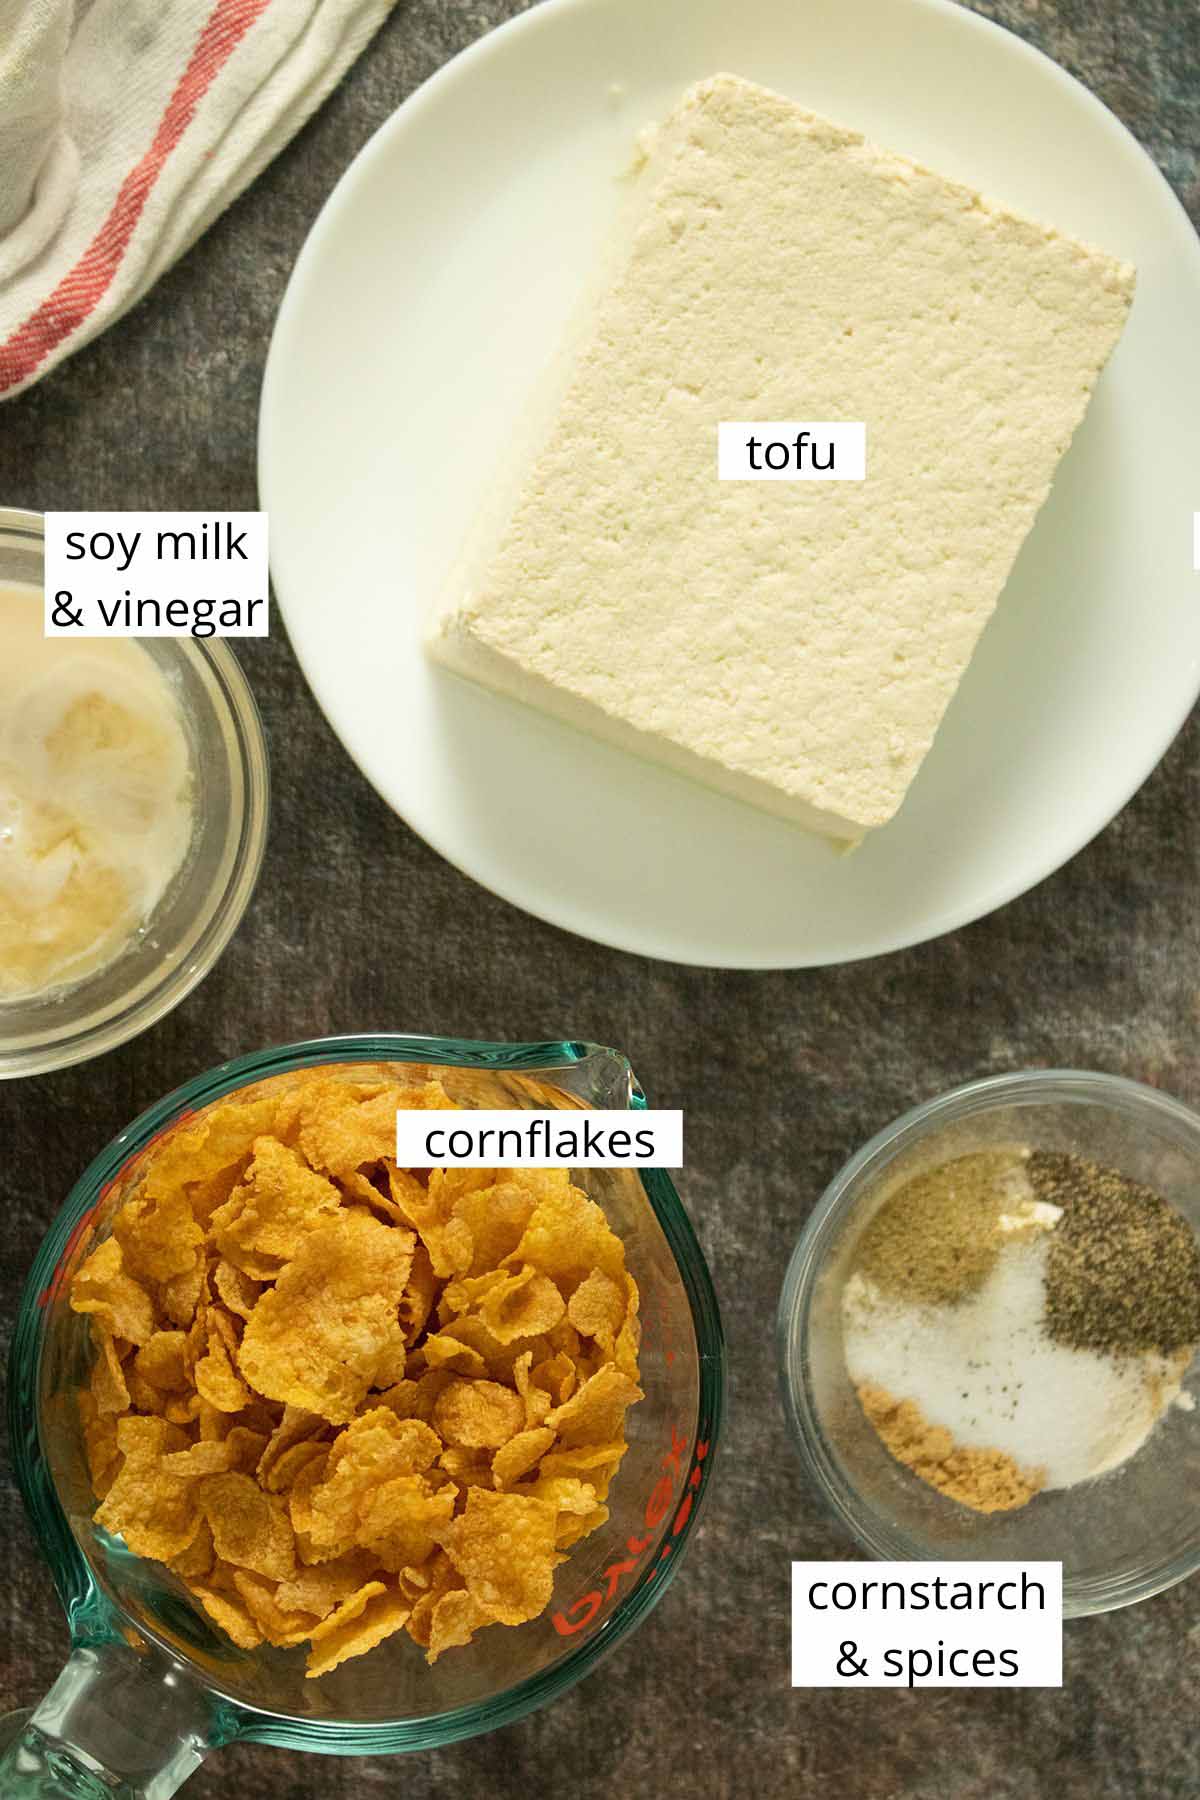 tofu, cornflakes, vegan buttermilk, and a bowl of spices on a slate table